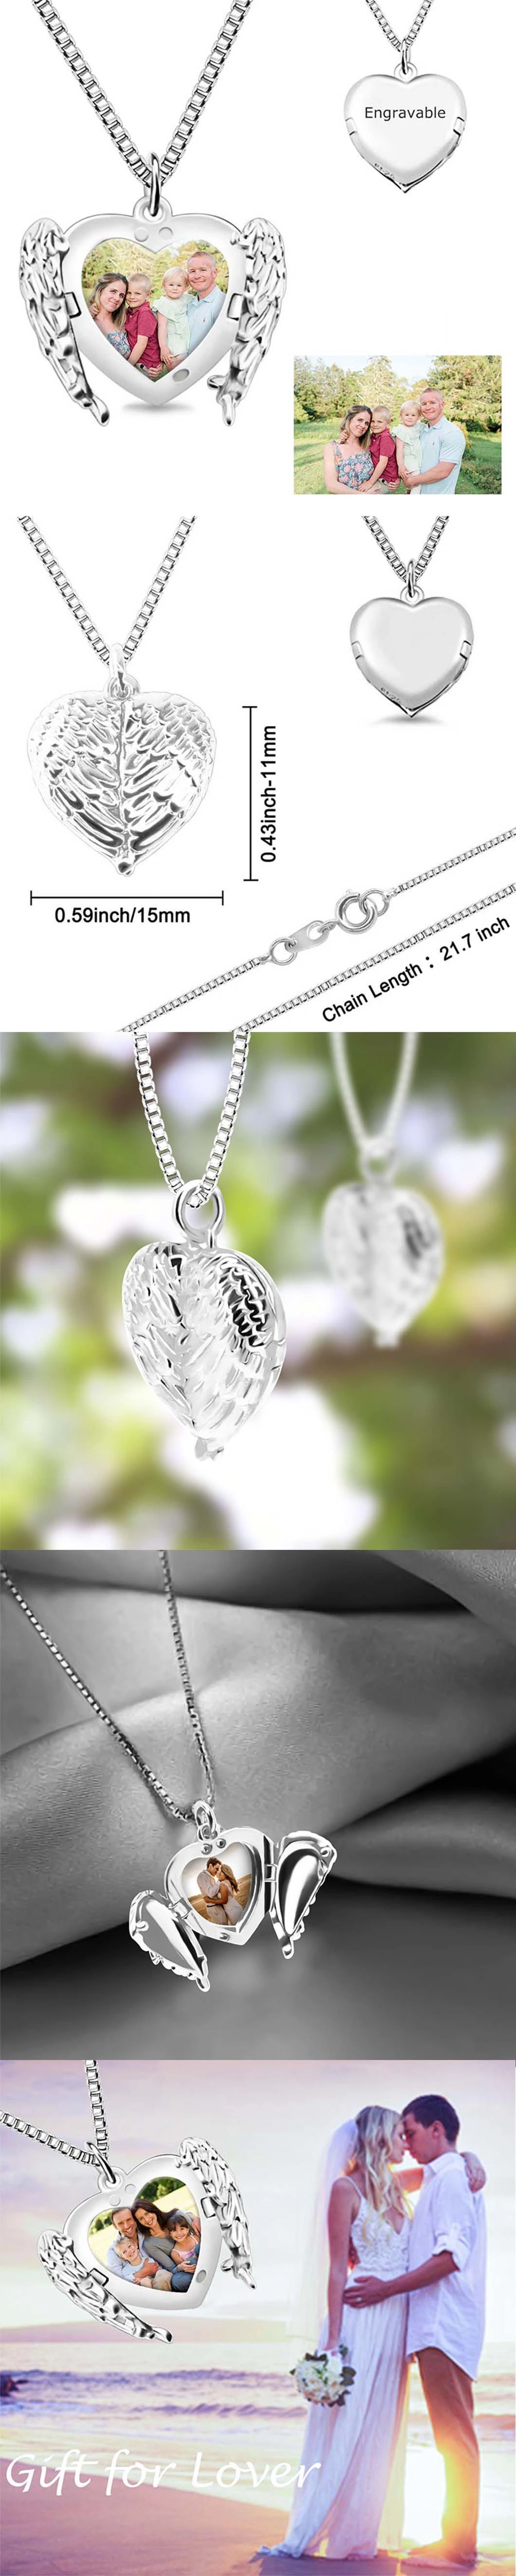 Fashion High Quality Jewelry Choker Angel Heart Necklace Pendant, Wholesale Necklace